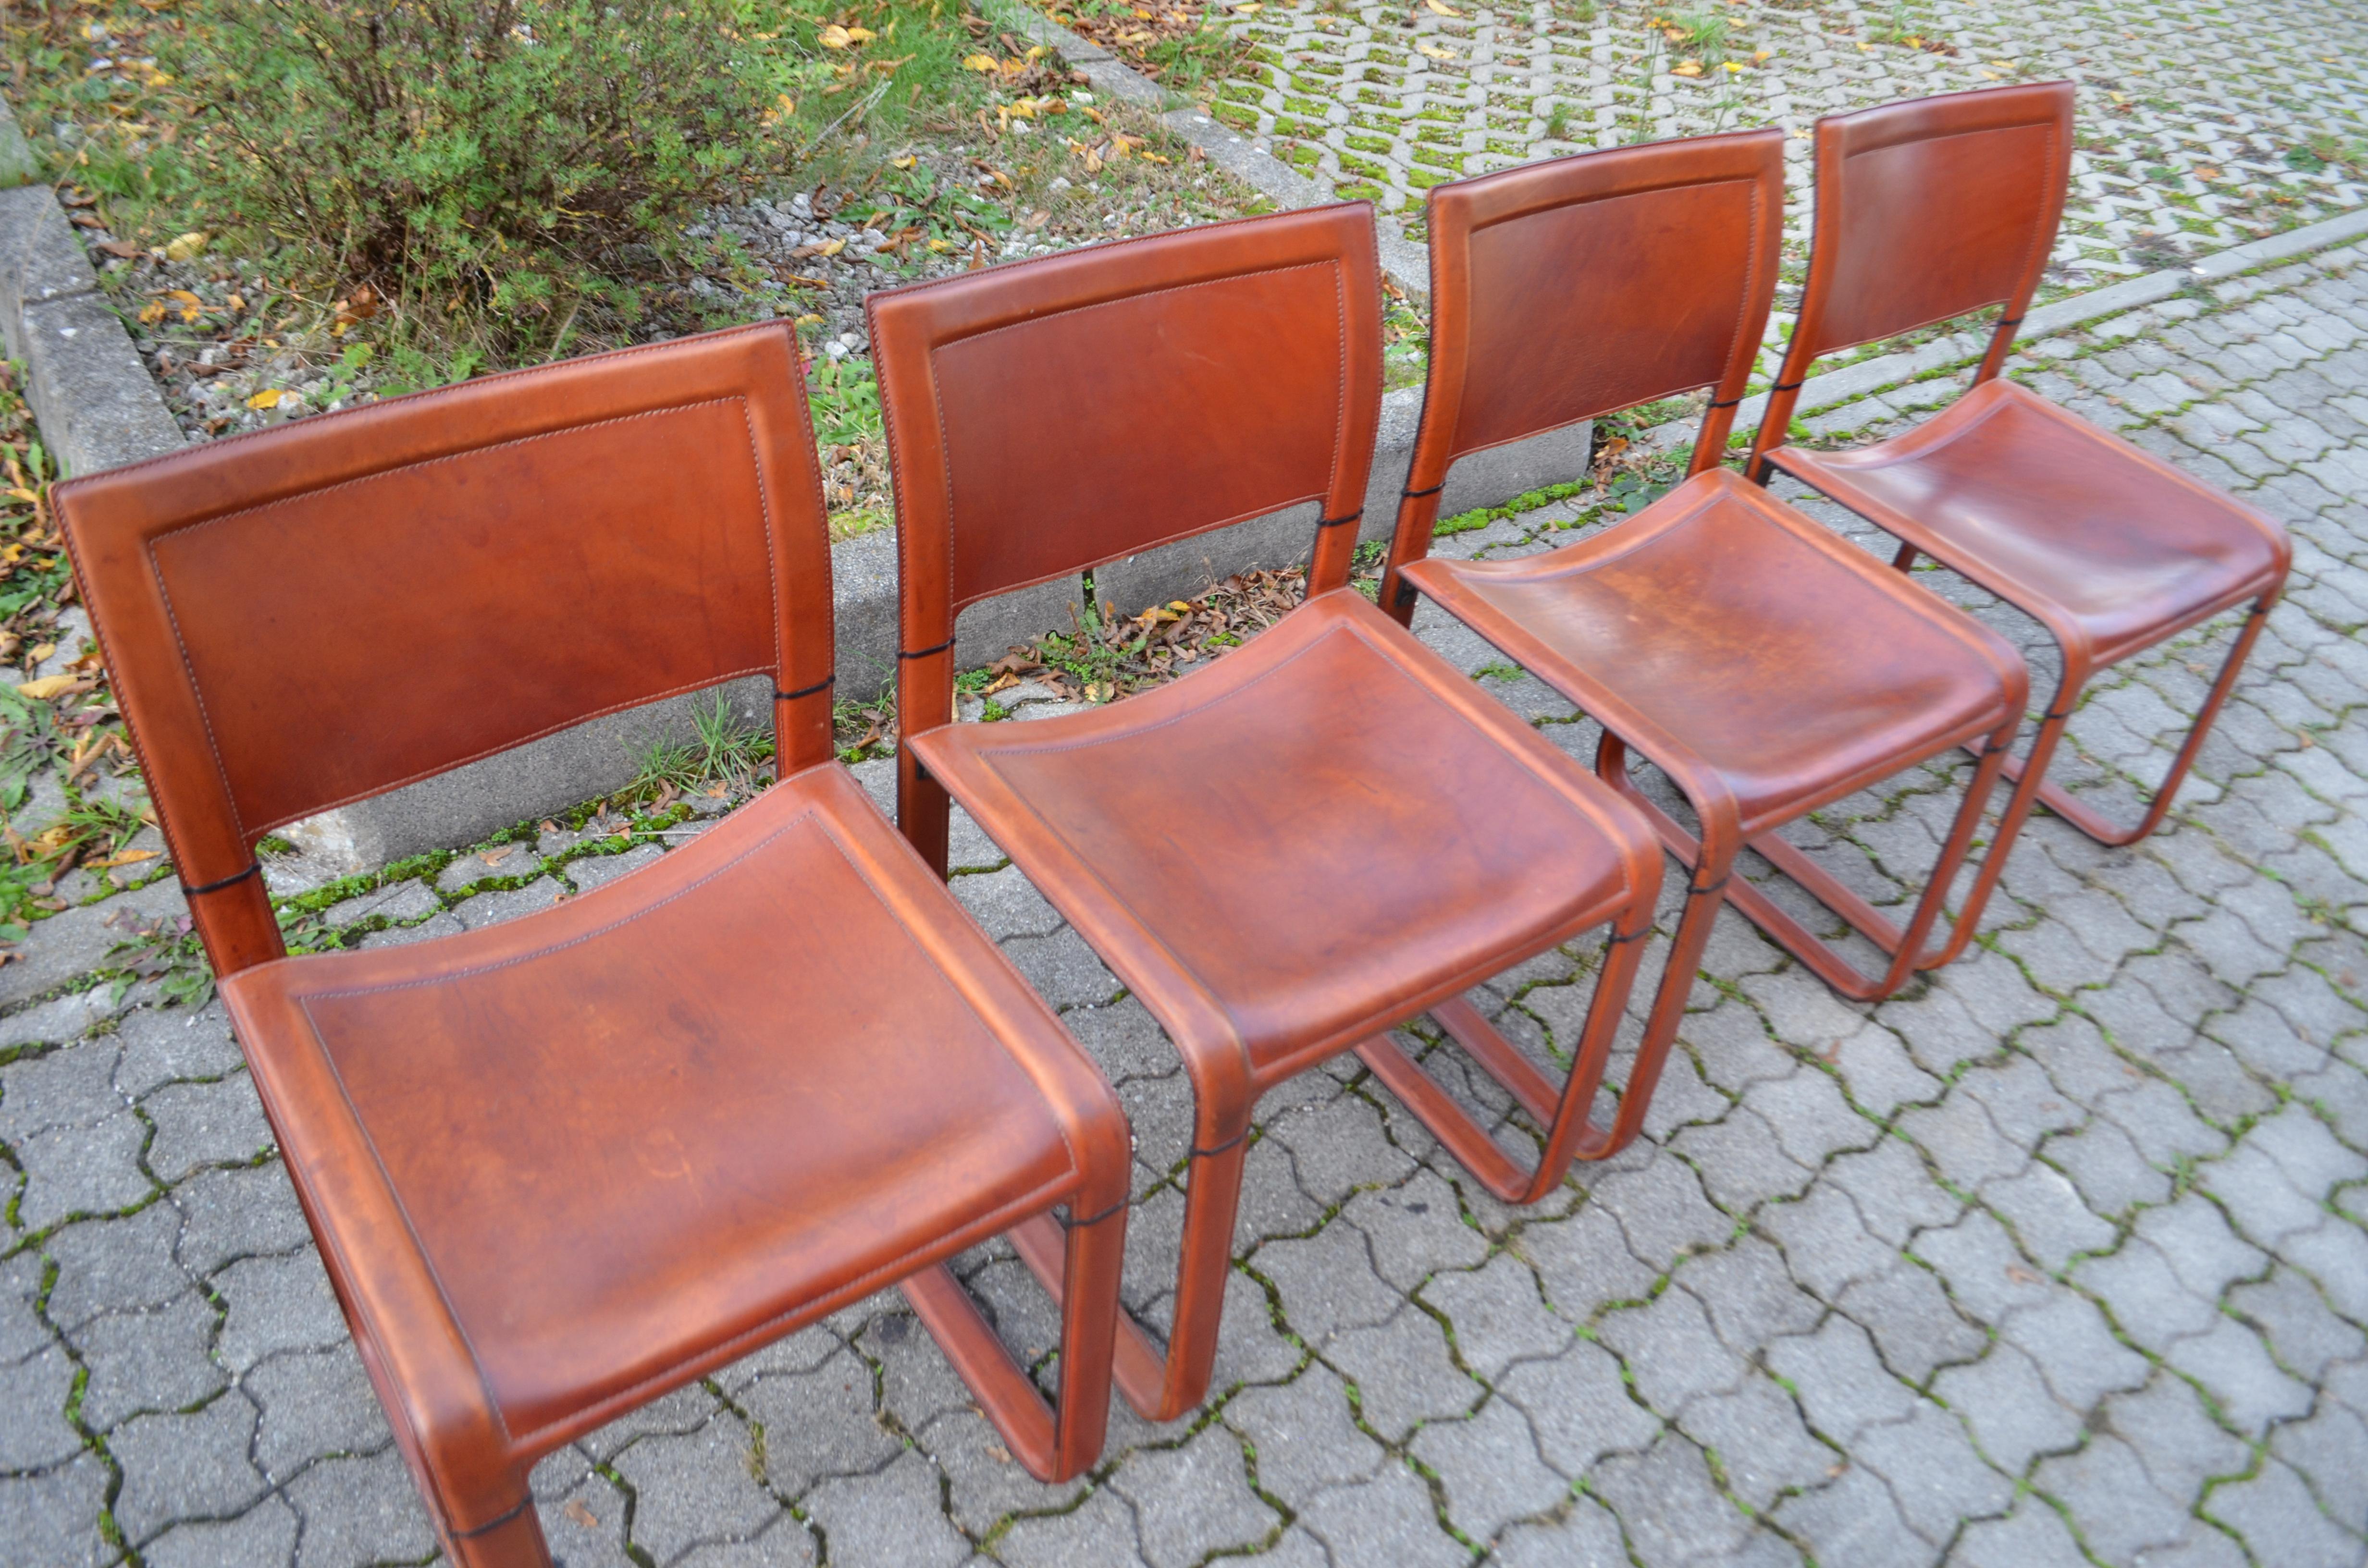 Tito Agnoli Matteo Grassi Model Sistina Oxred Leather Dining Chair Set of 4 For Sale 2